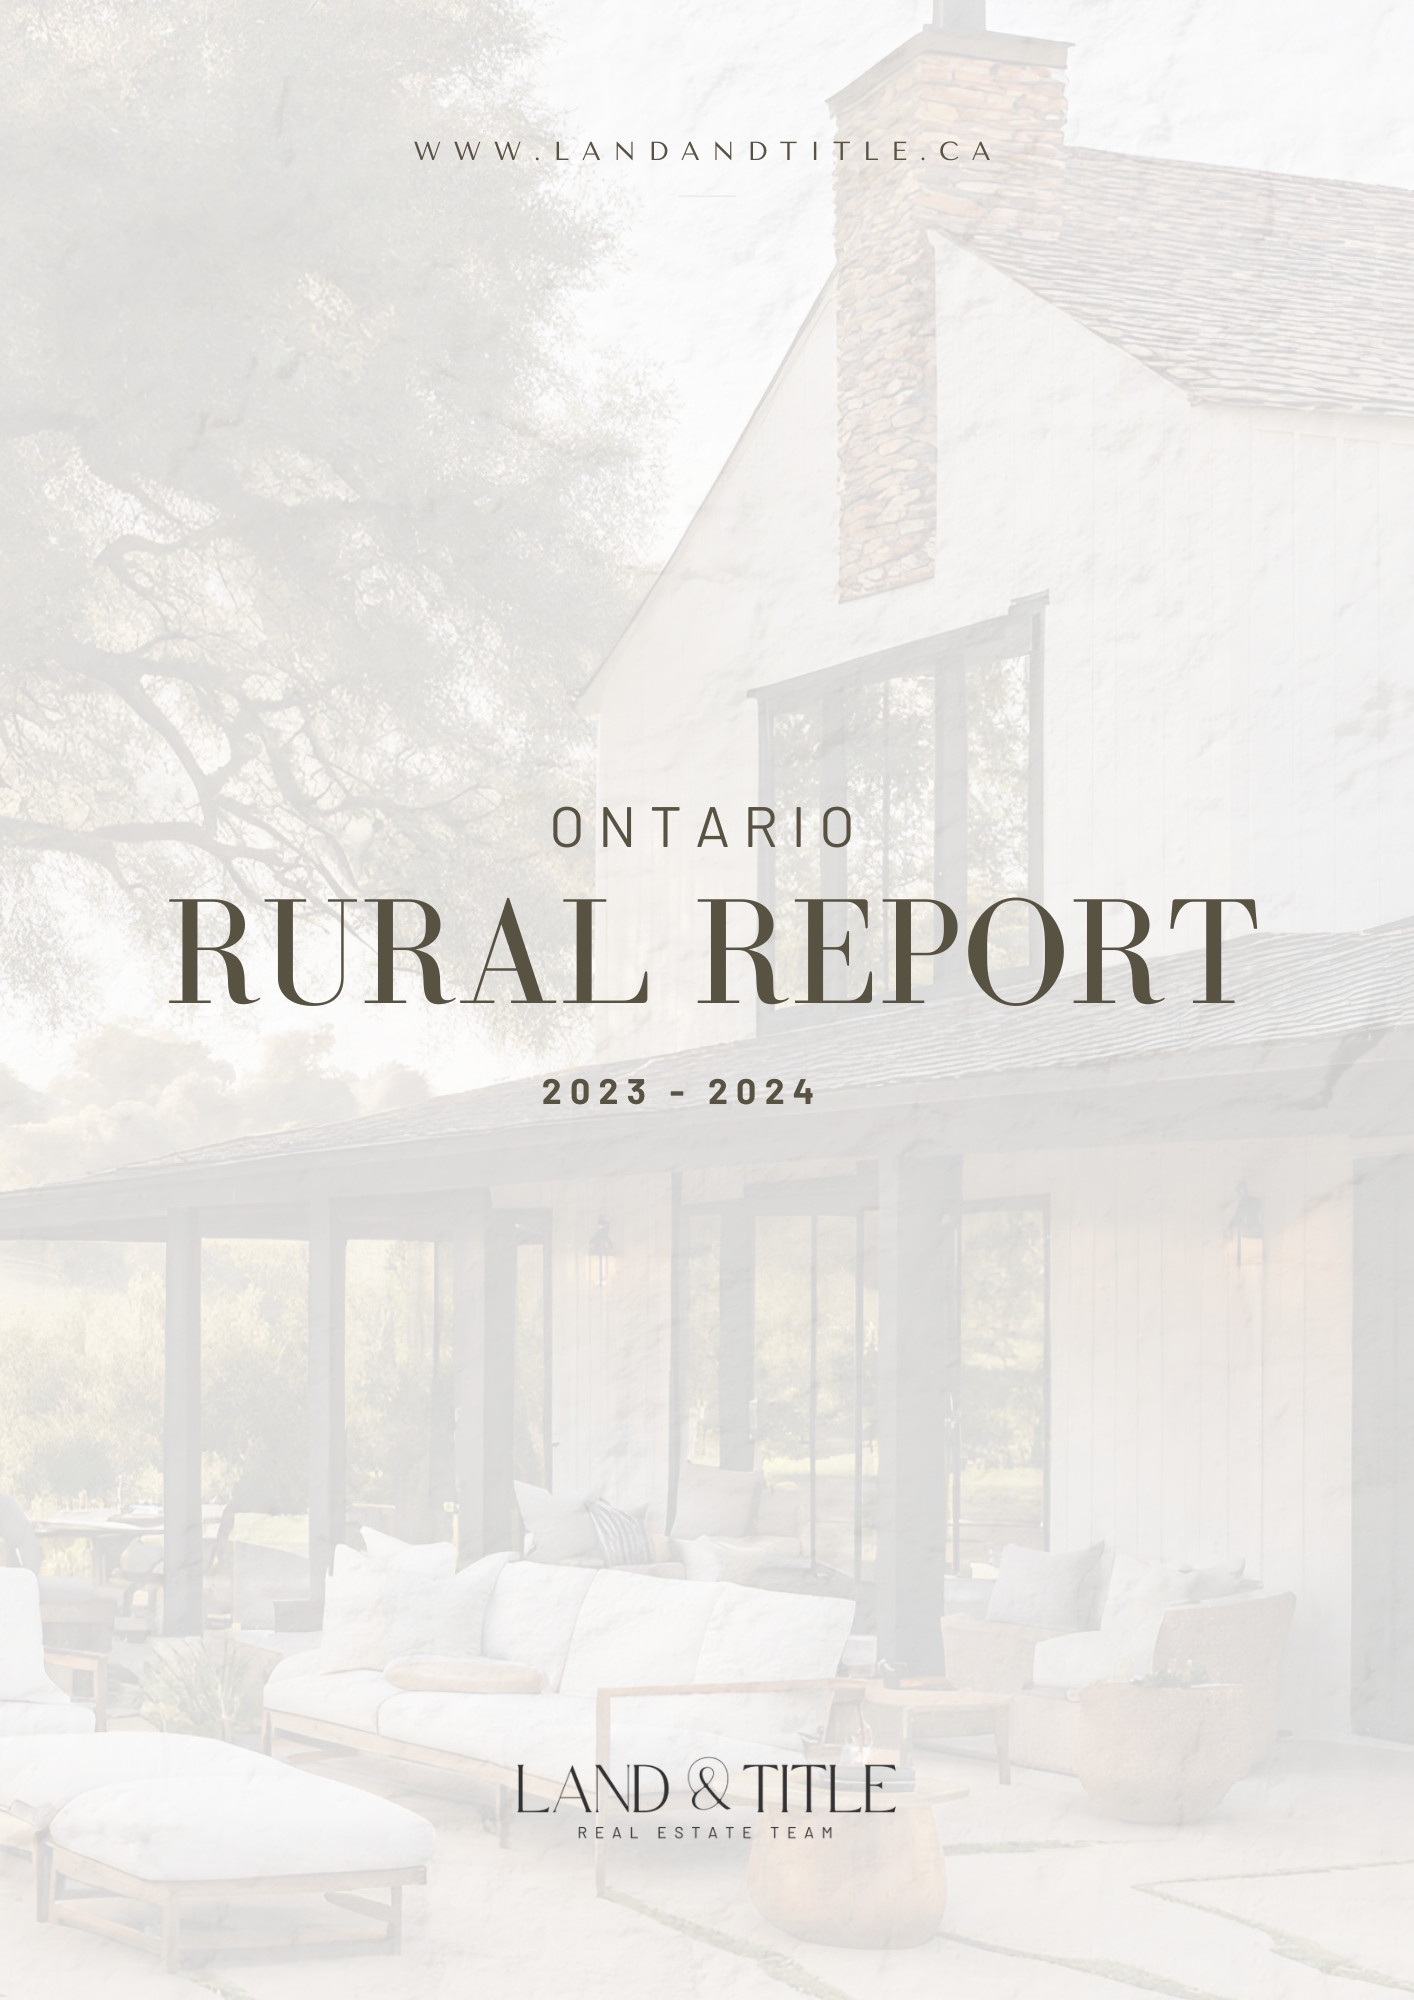 Rural Home Report for Ontario 2023/2024